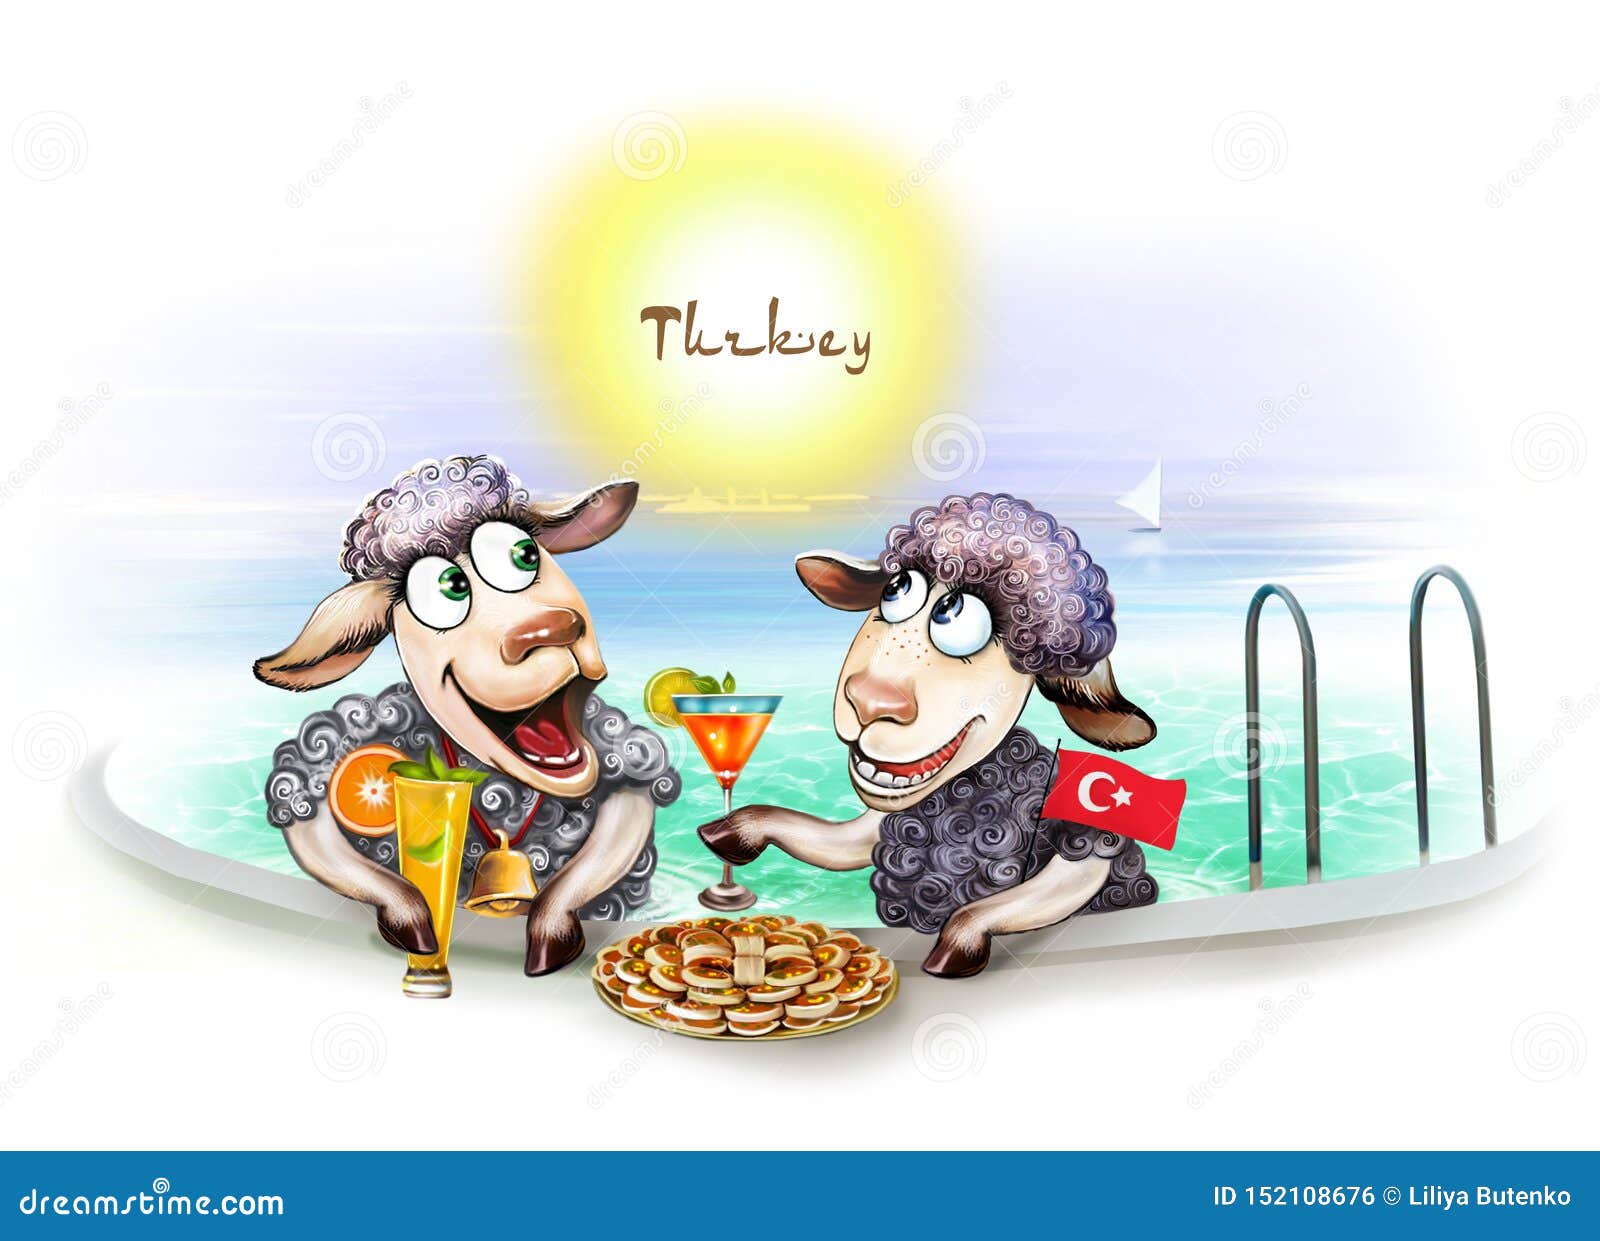 Two Sheep in a Hotel in Turkey Stock Illustration - Illustration of bodrum,  food: 152108676